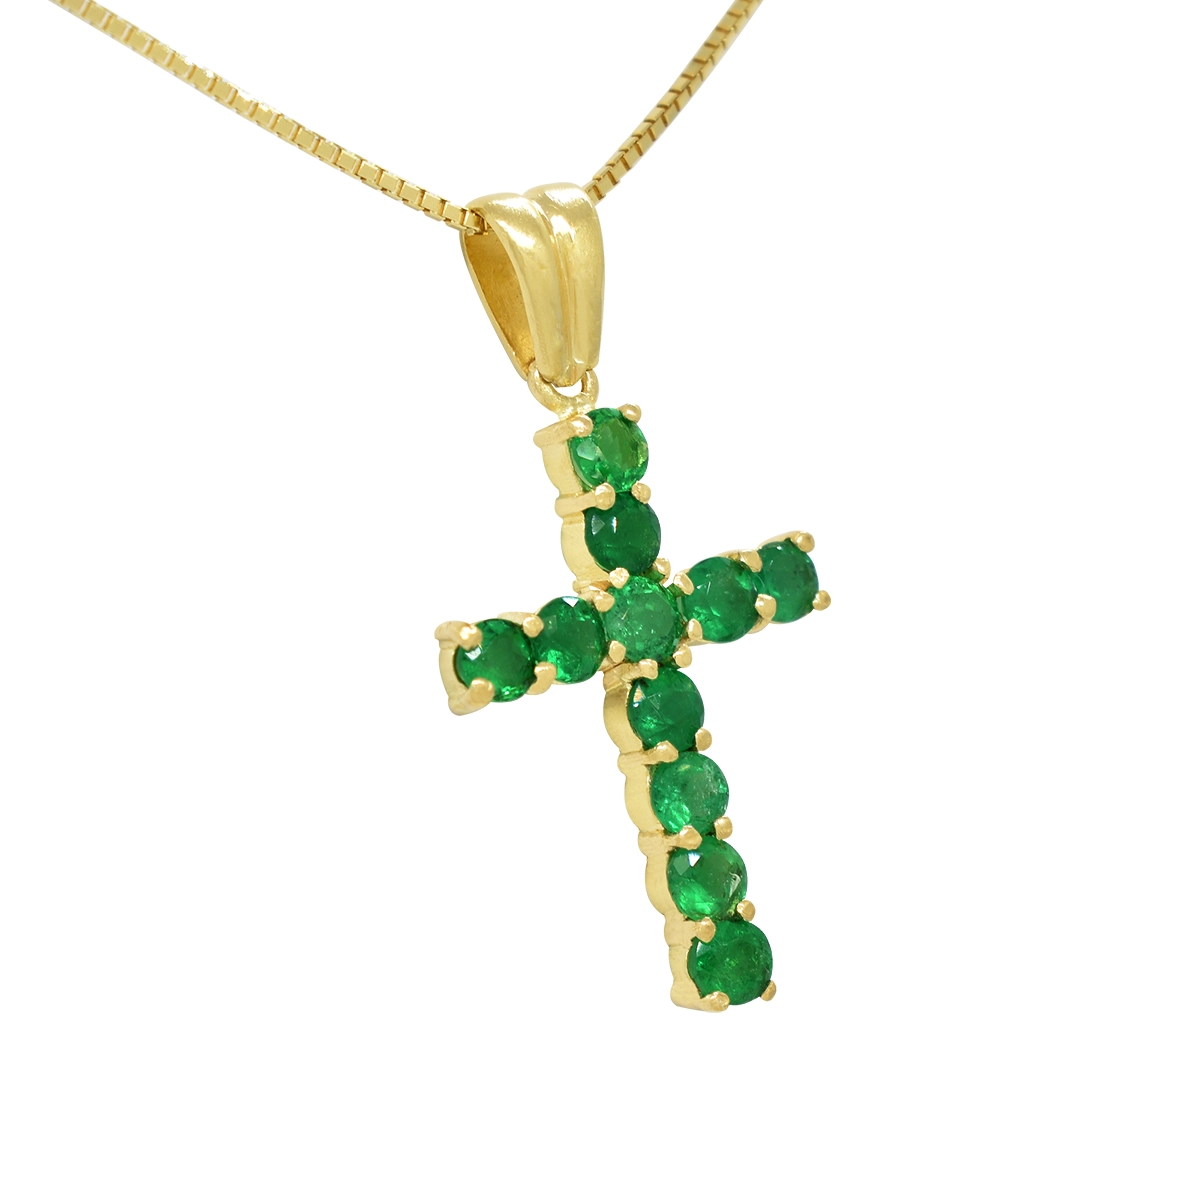 Emerald Cross Pendant in Solid 18K Yellow Gold With 11 Natural Emeralds